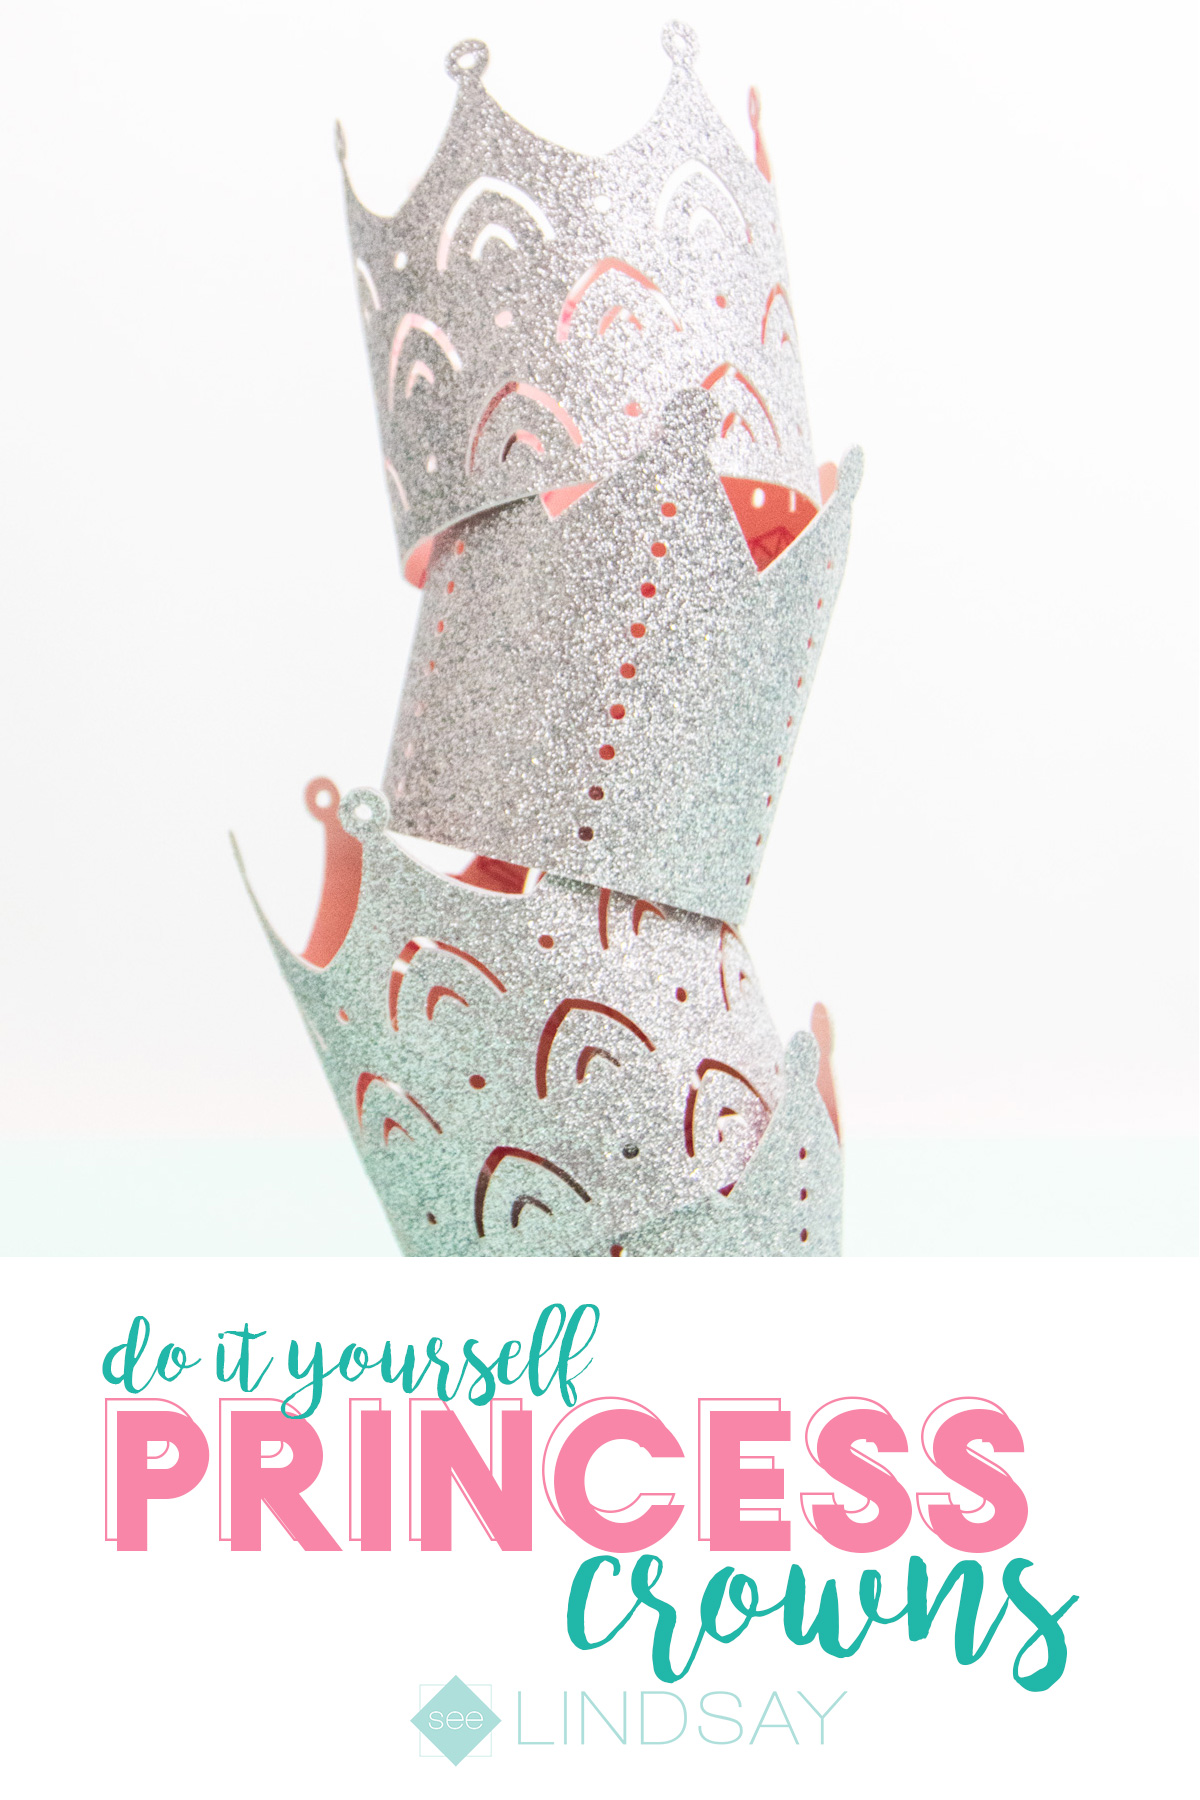 Create the perfect princess party crowns by using glitter cardstock and coordinating patterned paper. Get all the details on the blog. #princessparty #princesspartyideas #diypapercrown #cricut #cricutmade